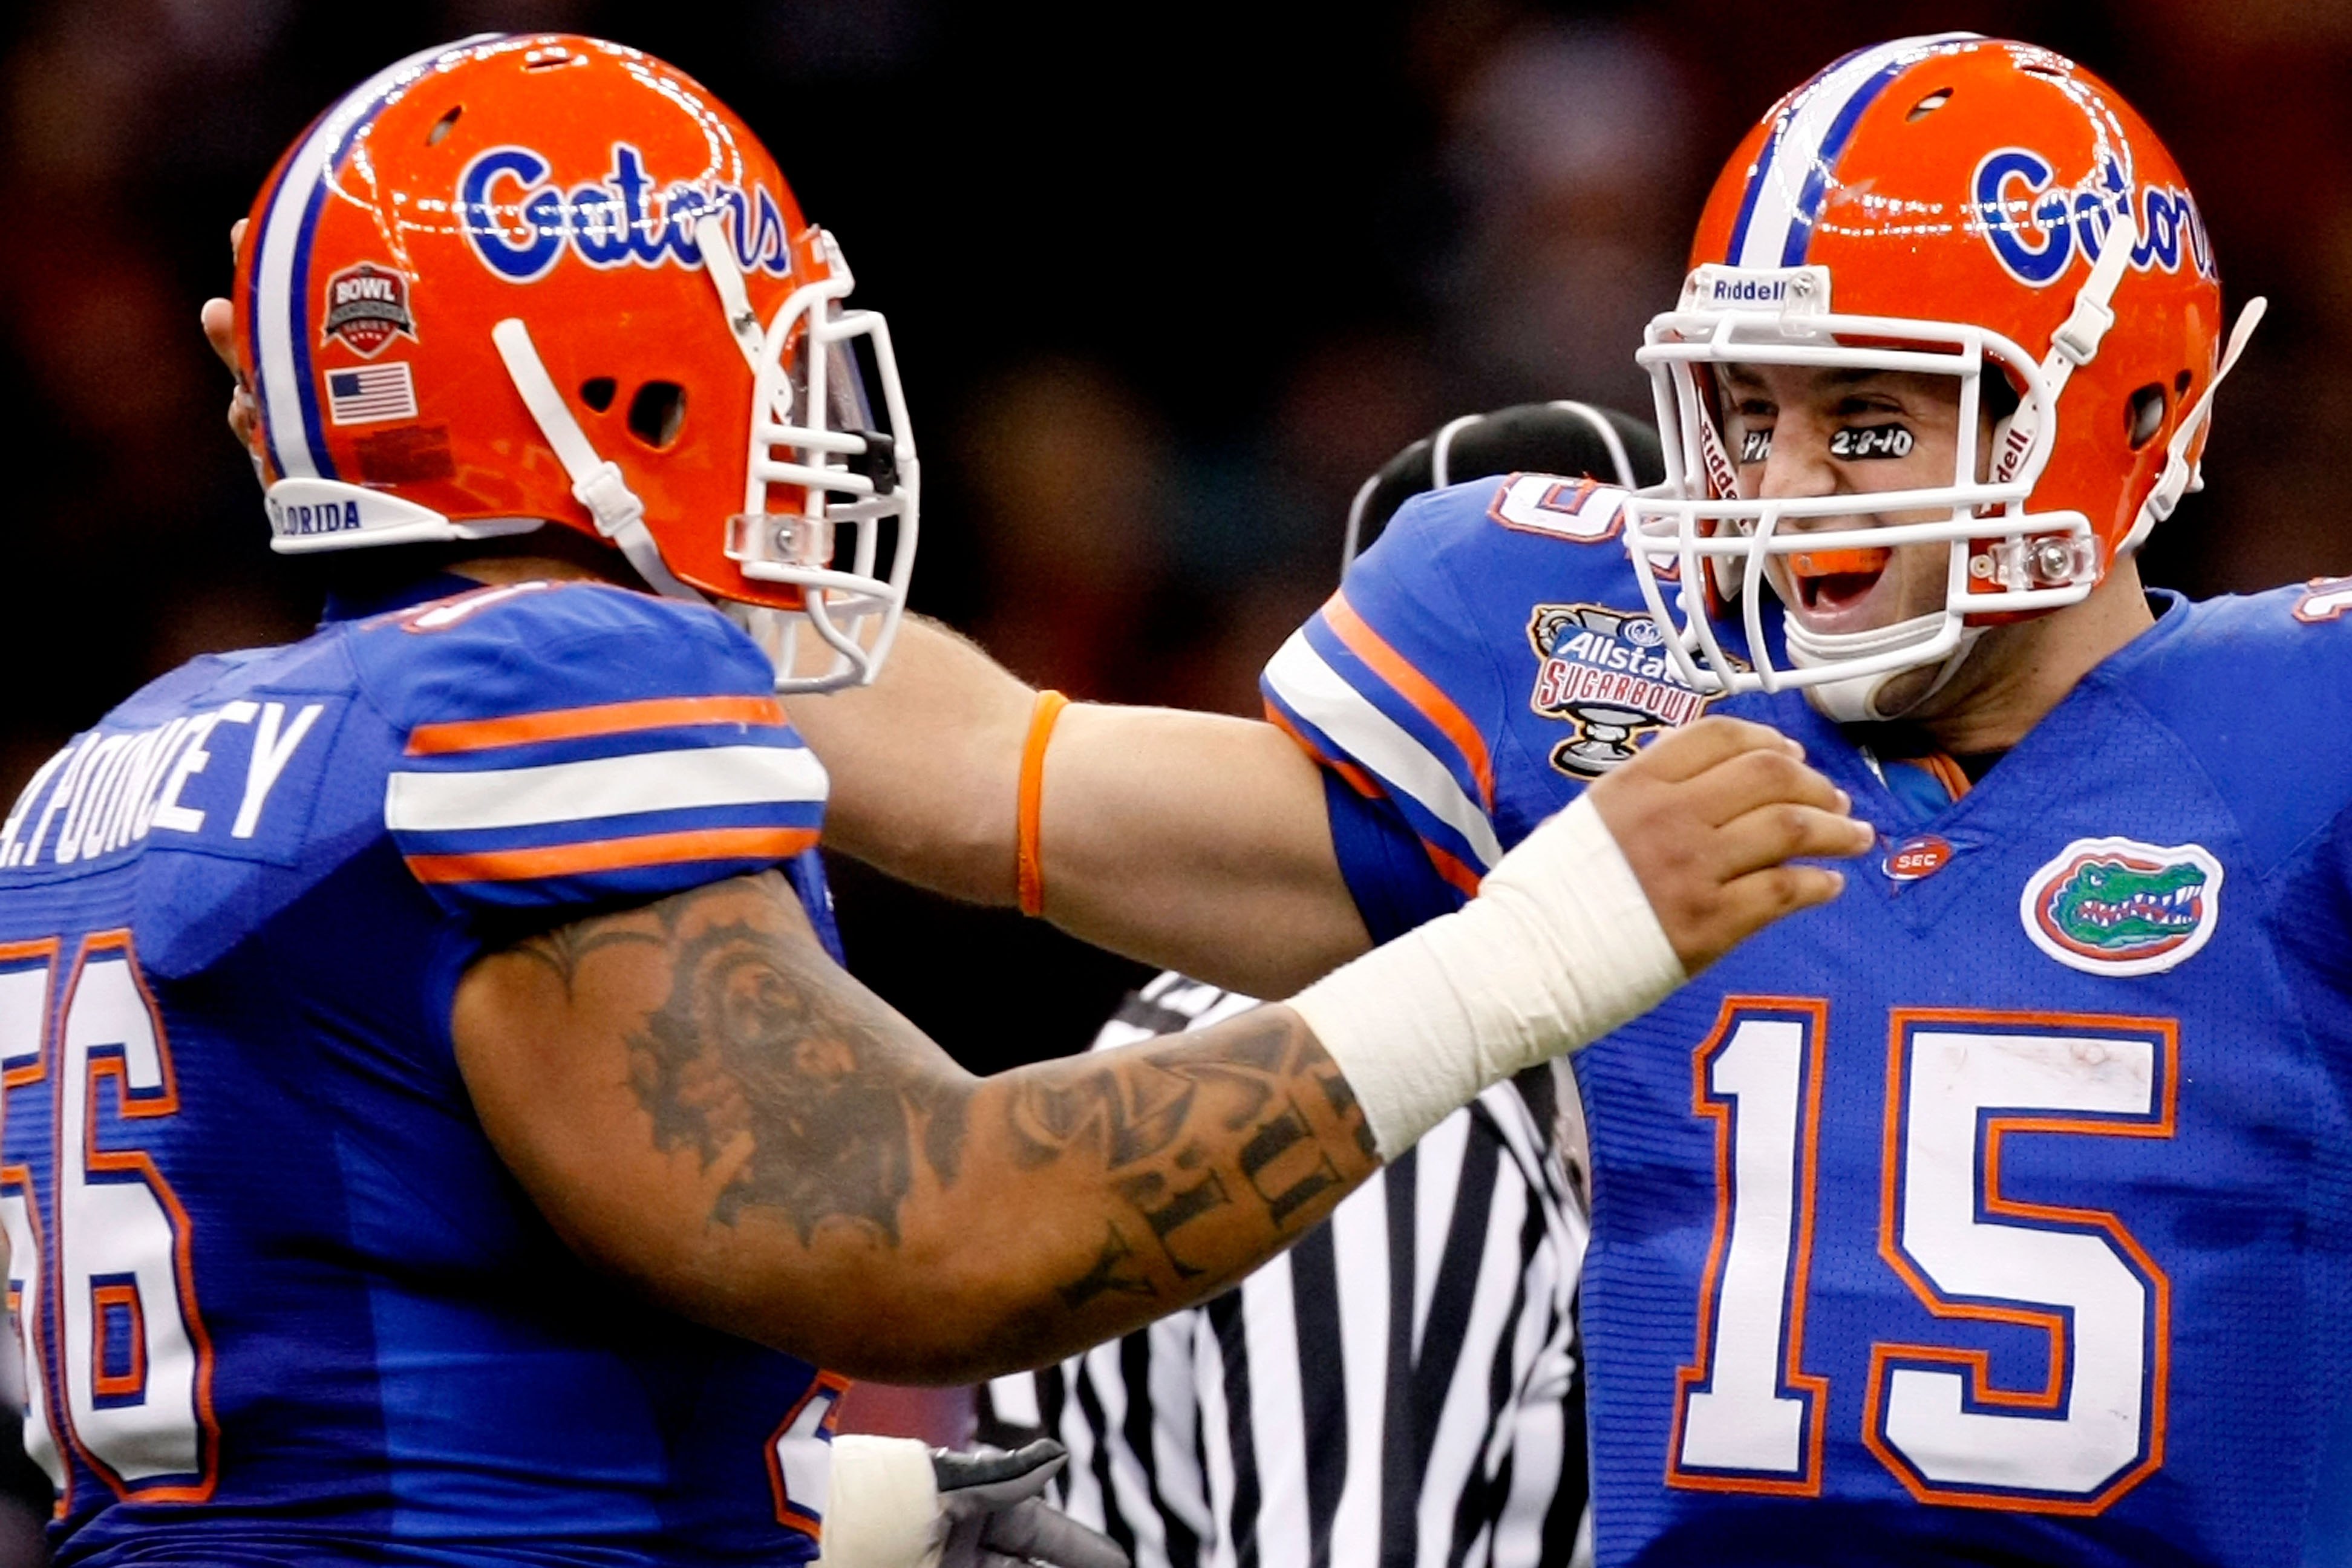 NEW ORLEANS - JANUARY 01:  Tim Tebow #15 of the Florida Gators celebrates with his teammates Maurkice Pouncey #56 after play against the Cincinnati Bearcats during the Allstate Sugar Bowl at the Louisana Superdome on January 1, 2010 in New Orleans, Louisi